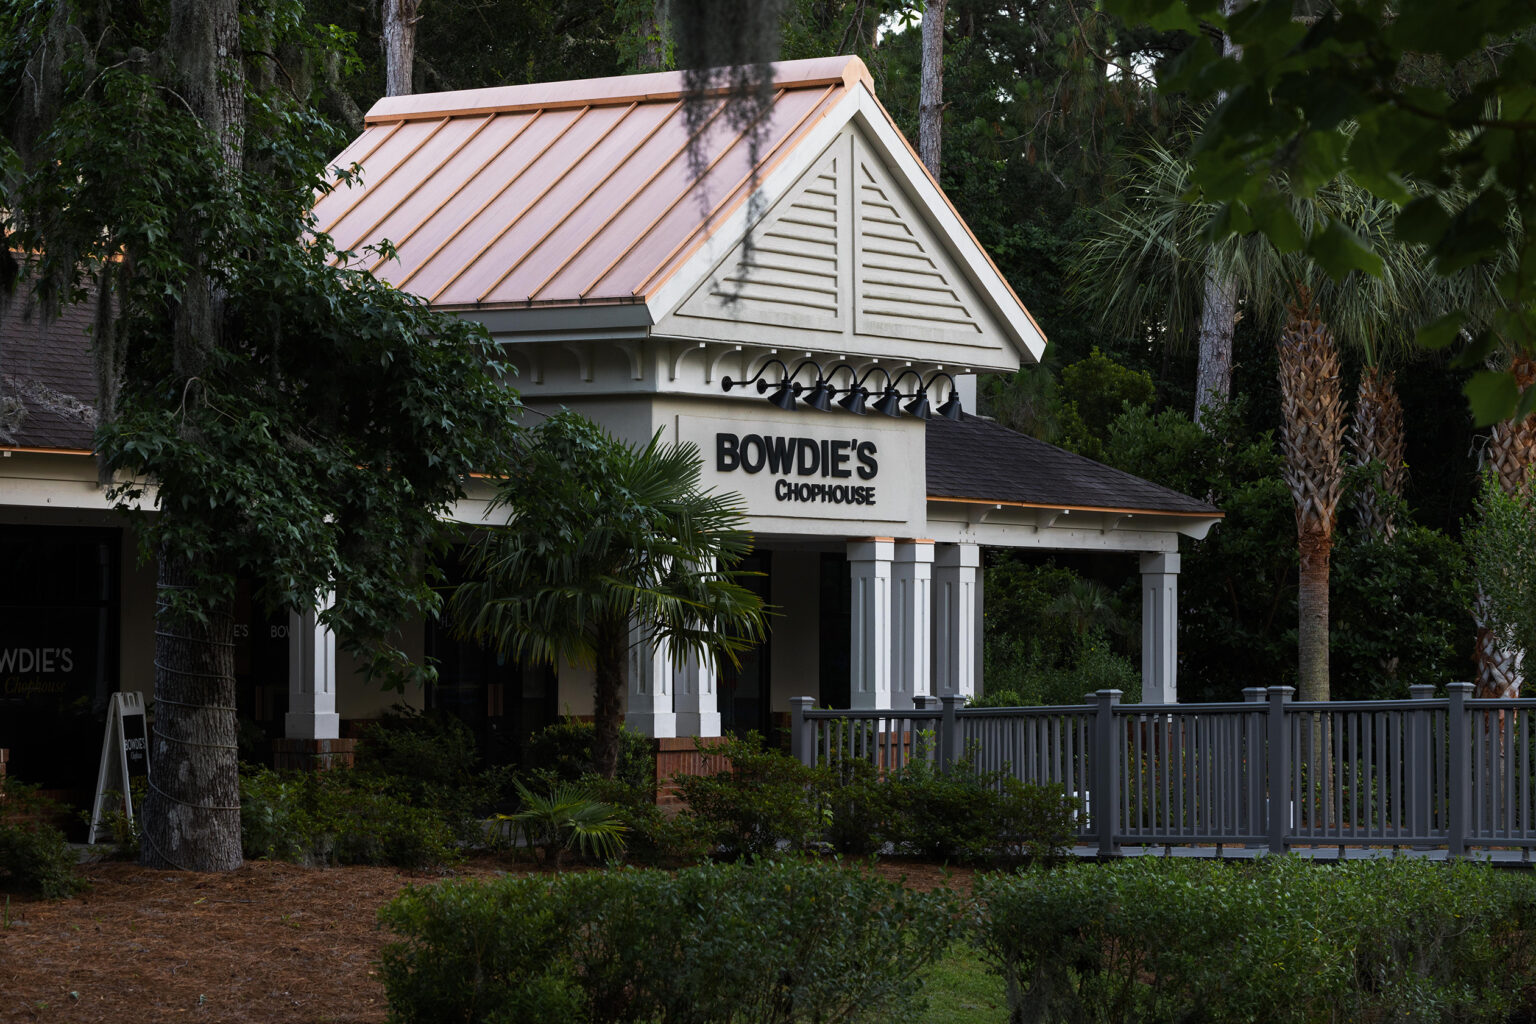 Outside of Bowdie's Chophouse in Hilton Head